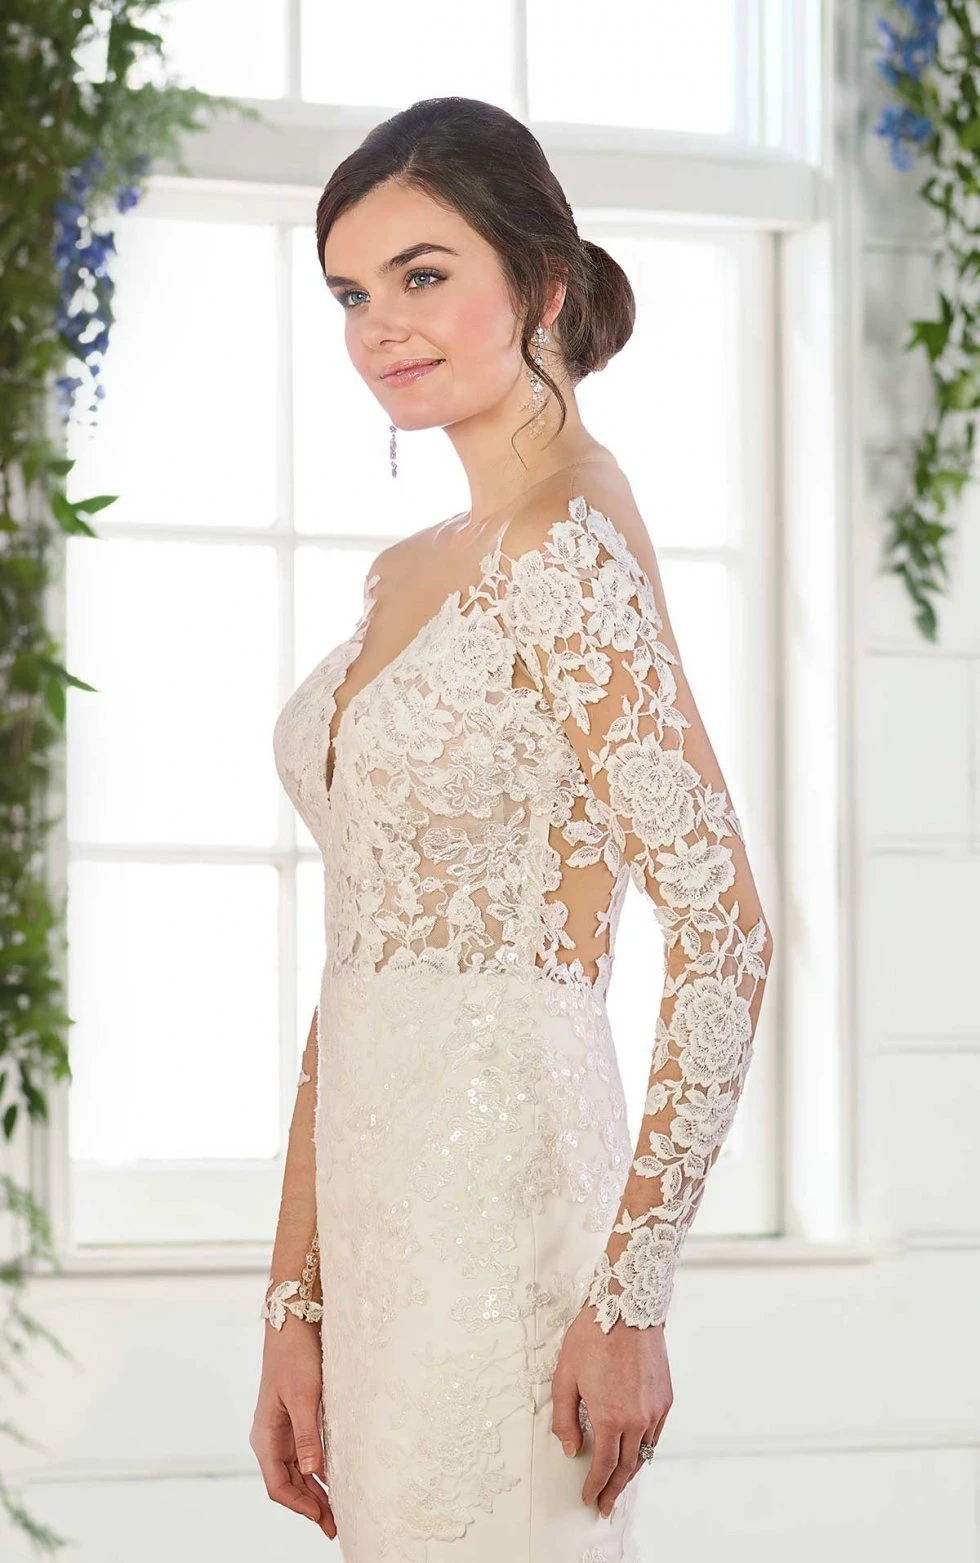 Wedding Dress with Lace Sleeves and VNeck Essense of